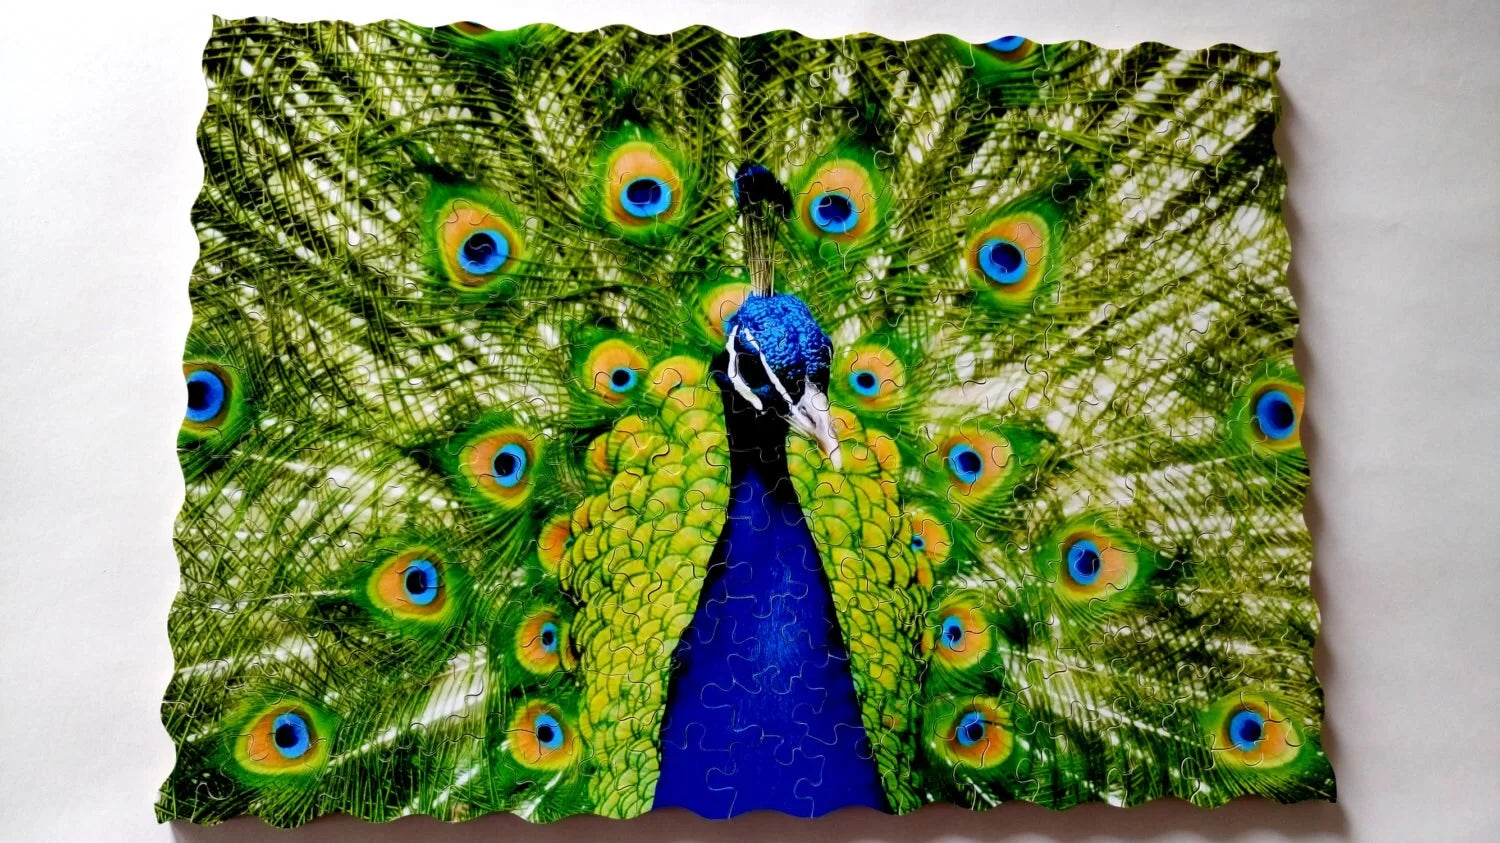 Mr Gogo Puzzles - Green Peacock Hand-cut Wooden Jigsaw Puzzle